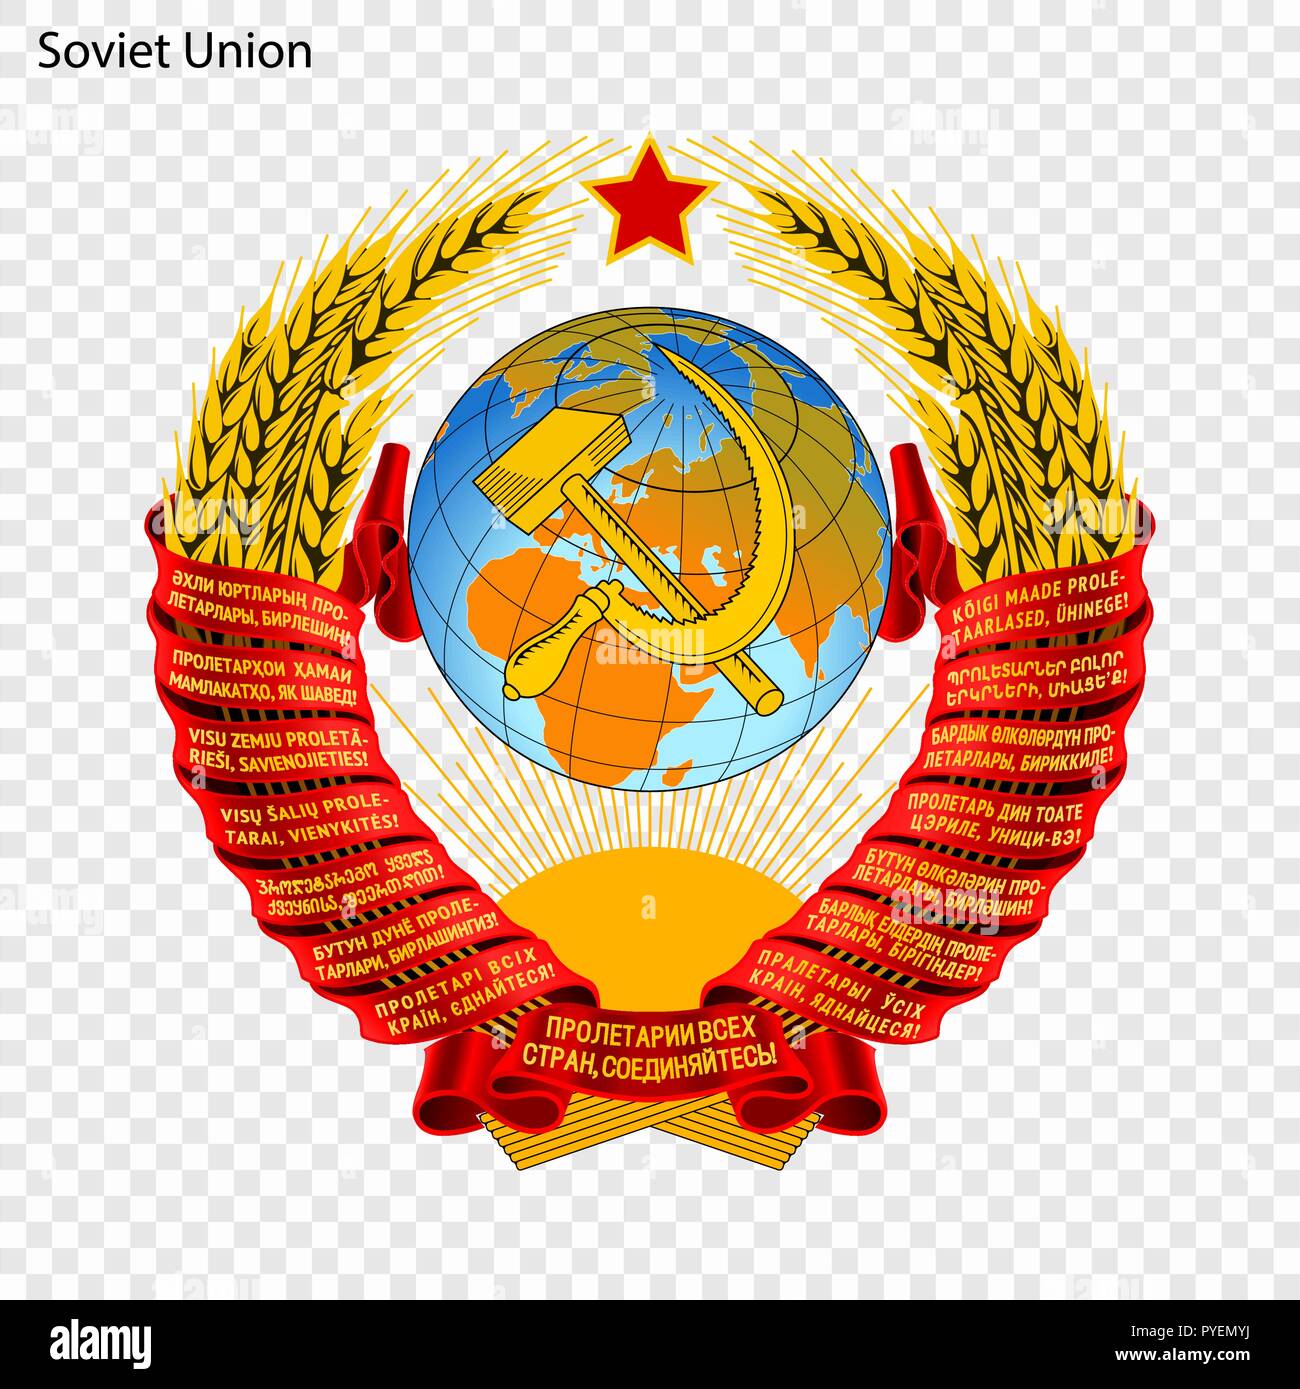 Old coat of arms Soviet Union Stock Vector